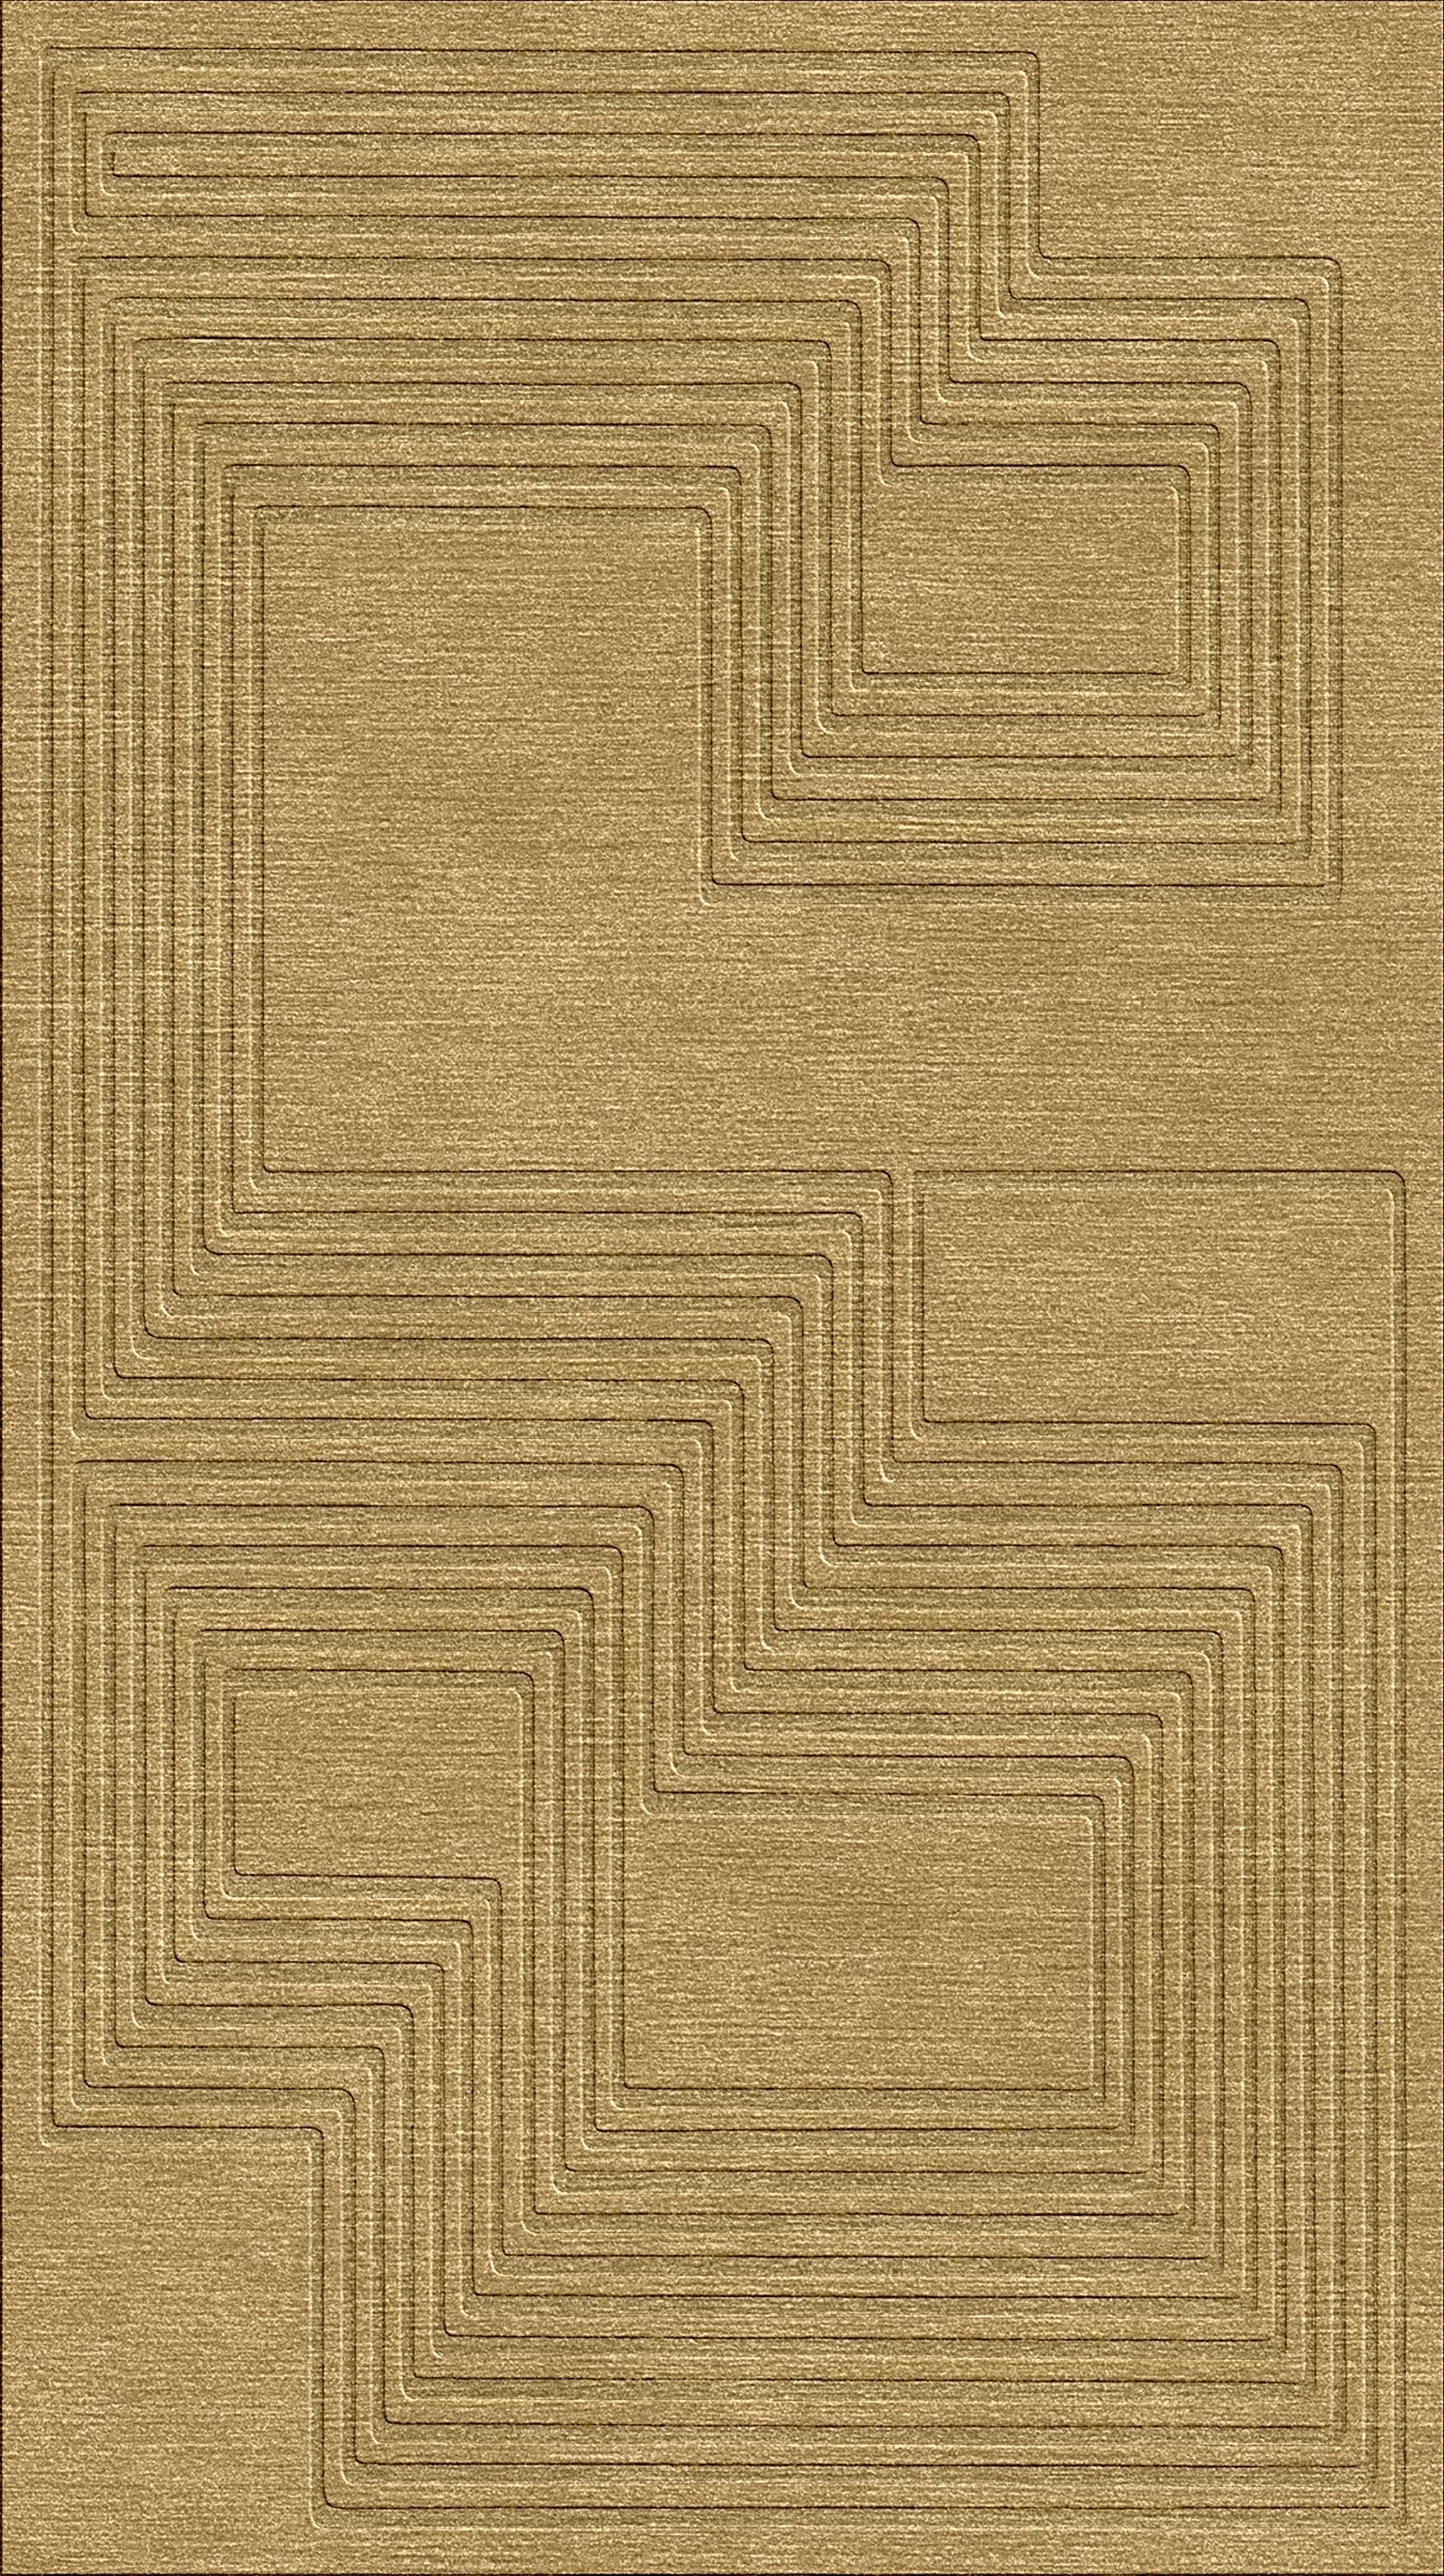 Gun tufted and hand carved under relief made in Nepal. It is composed with pure New Zealand wool to create a plush and soft texture through design. Maze Relief carpet accentuates space with graphic effects of puzzle-like paths depicted with fine